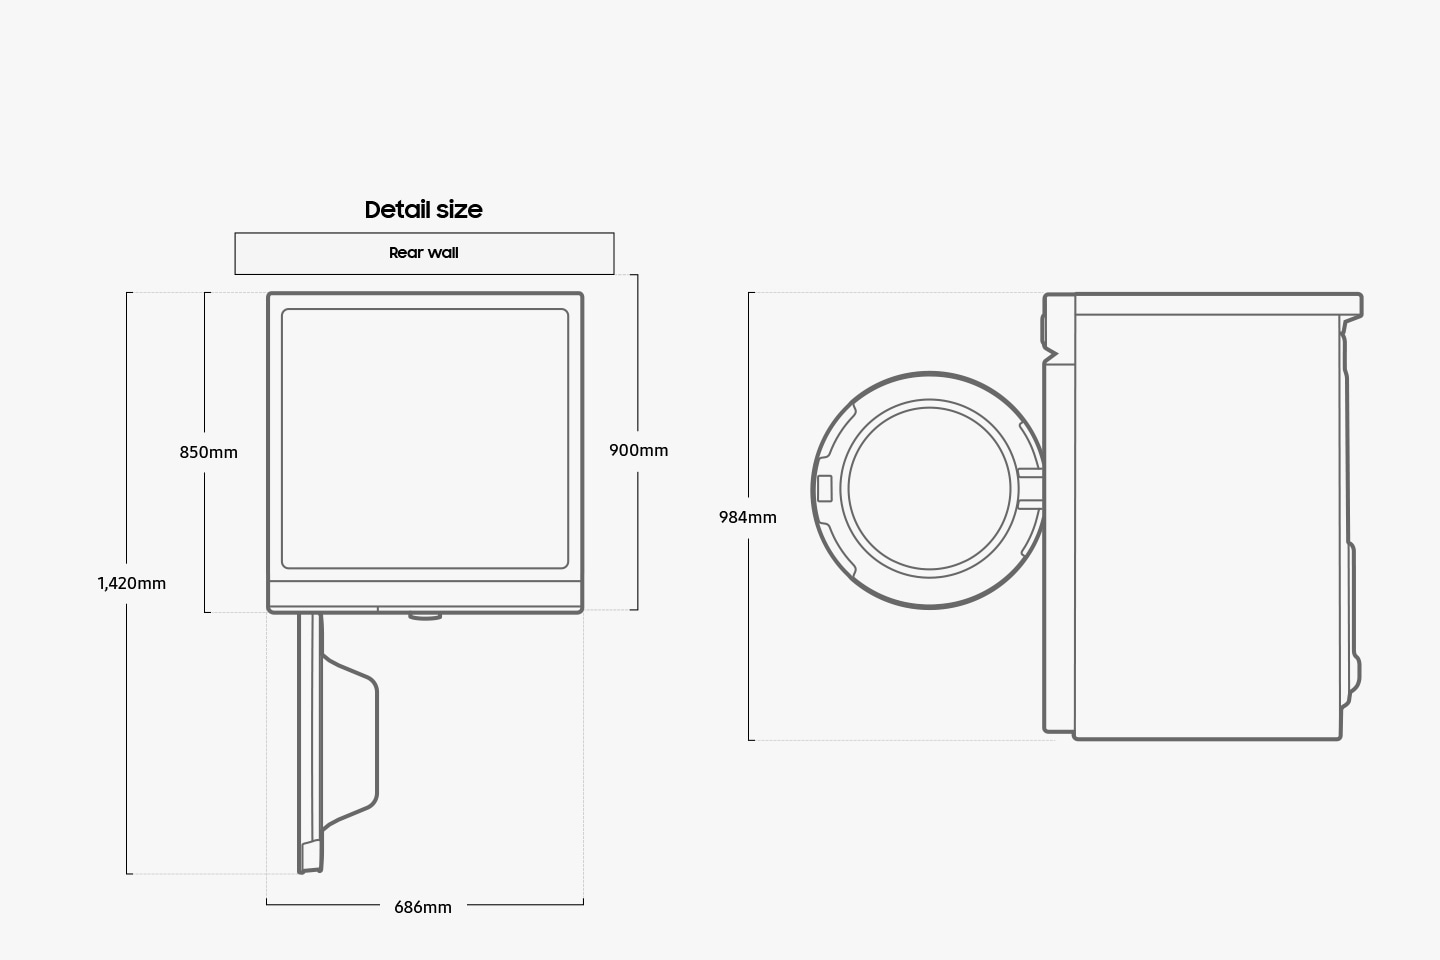 There are top and side views of Samsung Bespoke Grande AI washer with detailed dimensions. The washer is illustrated from the top with its door open perpendicular to the machine, creating a 90 degree angle. The depth of the washer itself is 850mm and the depth including the distance between the washer and the rear wall is 900mm. The total depth of the washer when the door is open is 1,420mm. The width of the washer is 686mm. The washer is illustrated from a side with its door wide open. The height of the washer is 984mm.